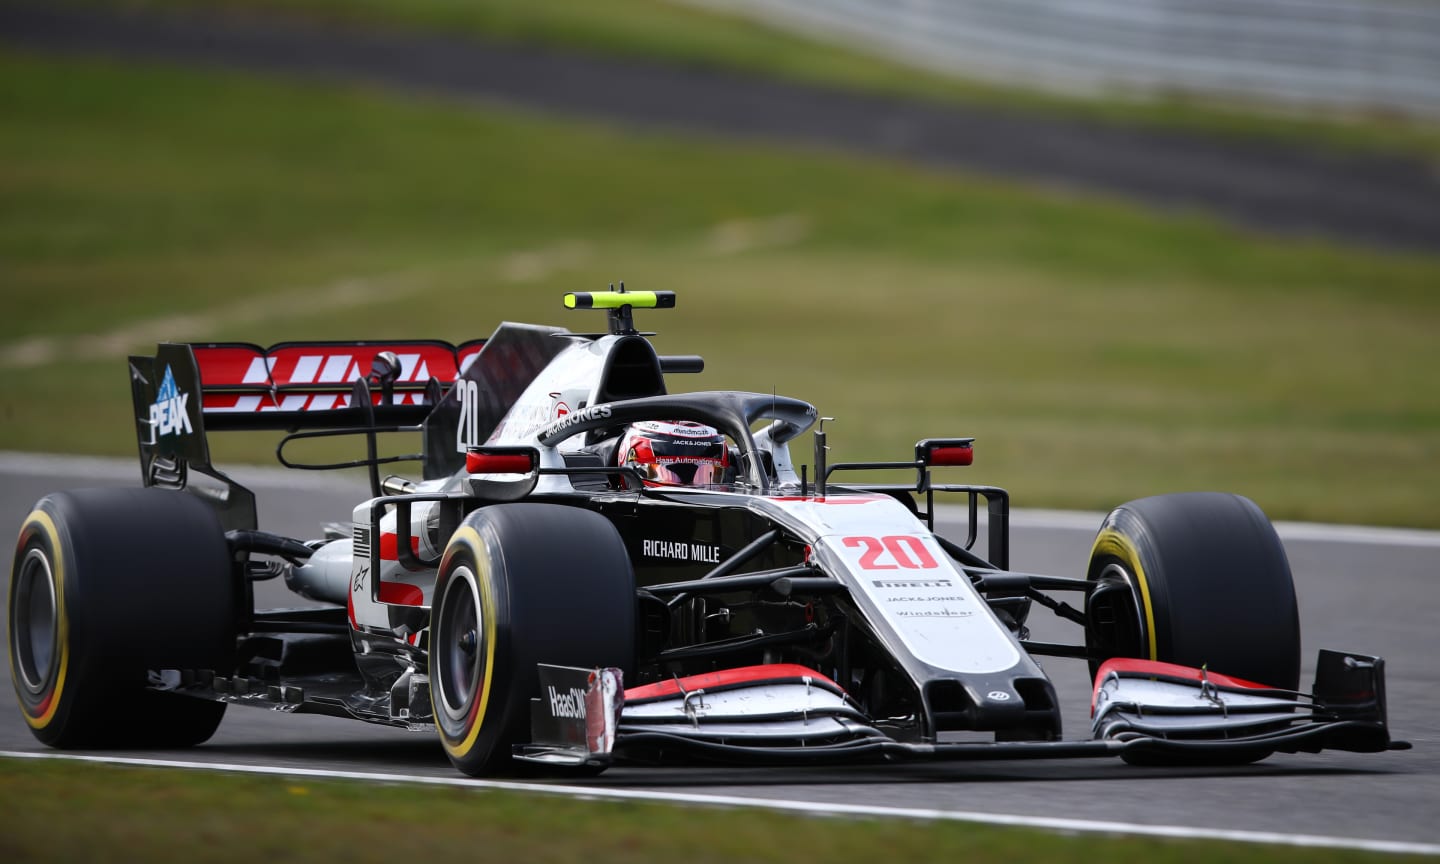 NUERBURG, GERMANY - OCTOBER 11: Kevin Magnussen of Denmark driving the (20) Haas F1 Team VF-20